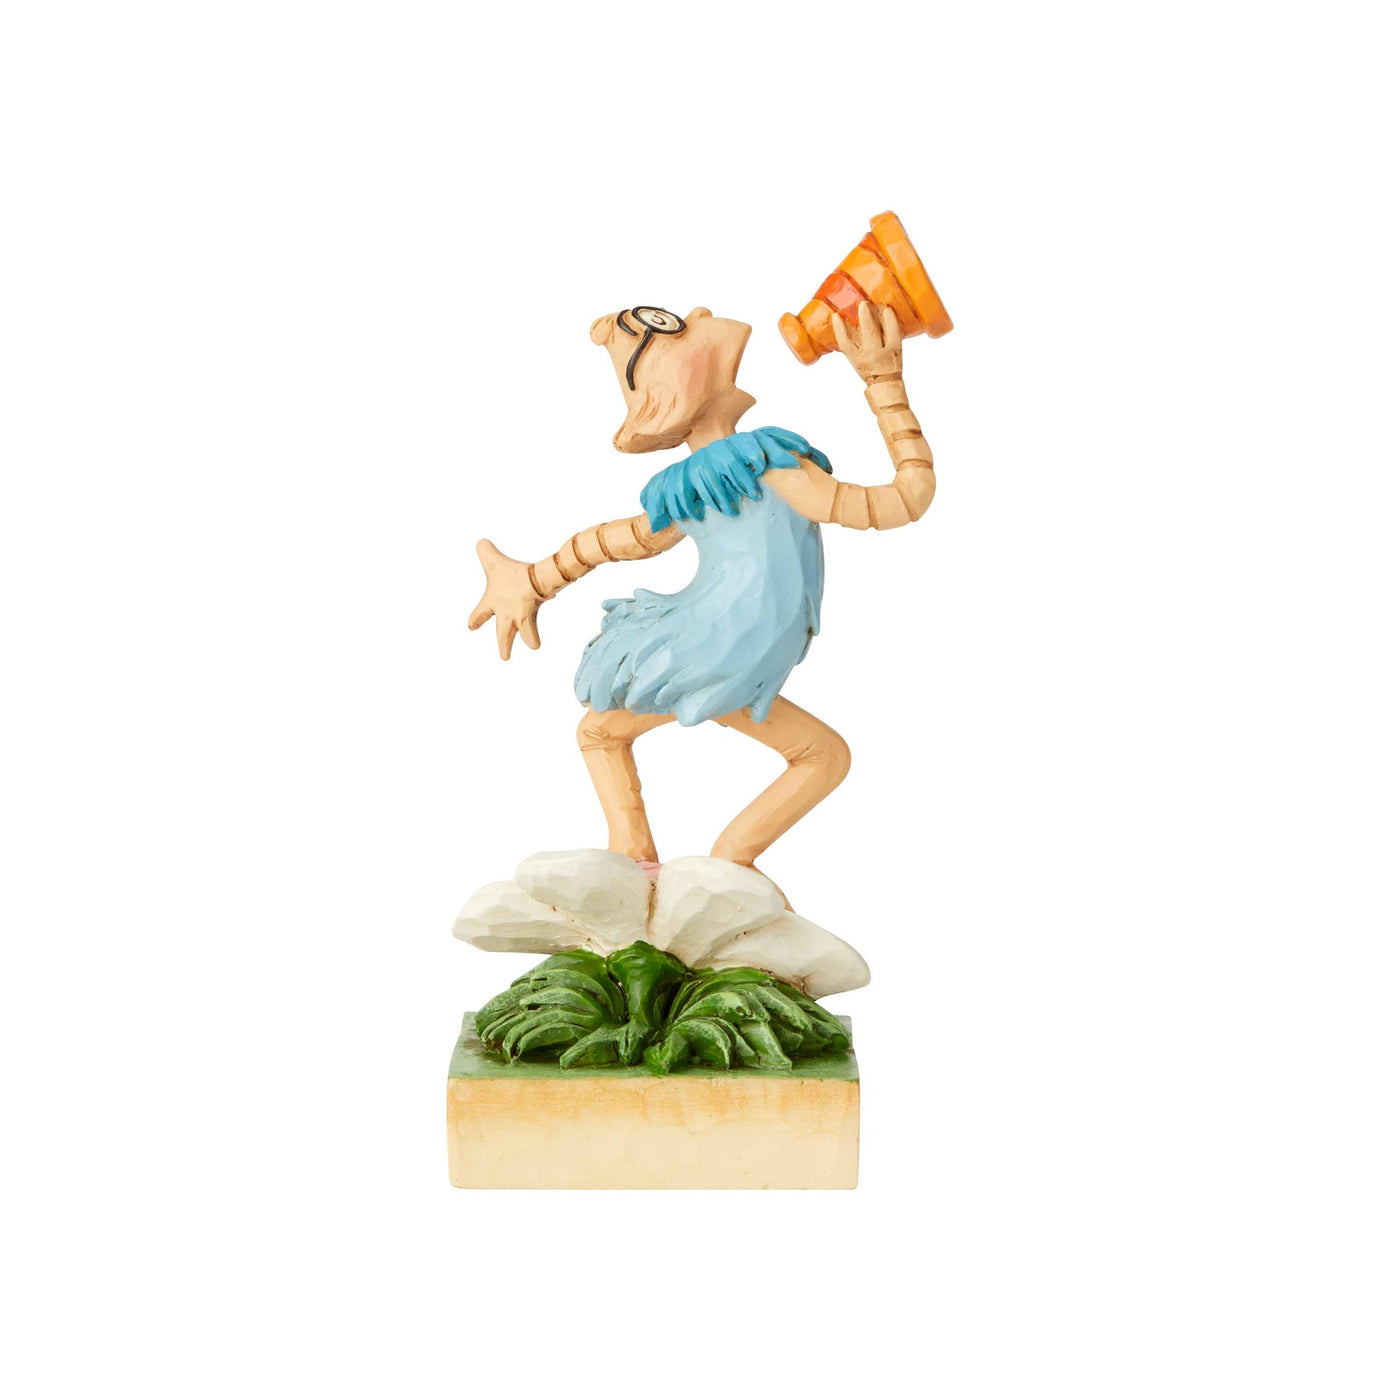 Whoville Mayor Dr. Seuss Jim Shore Figurine New with Box